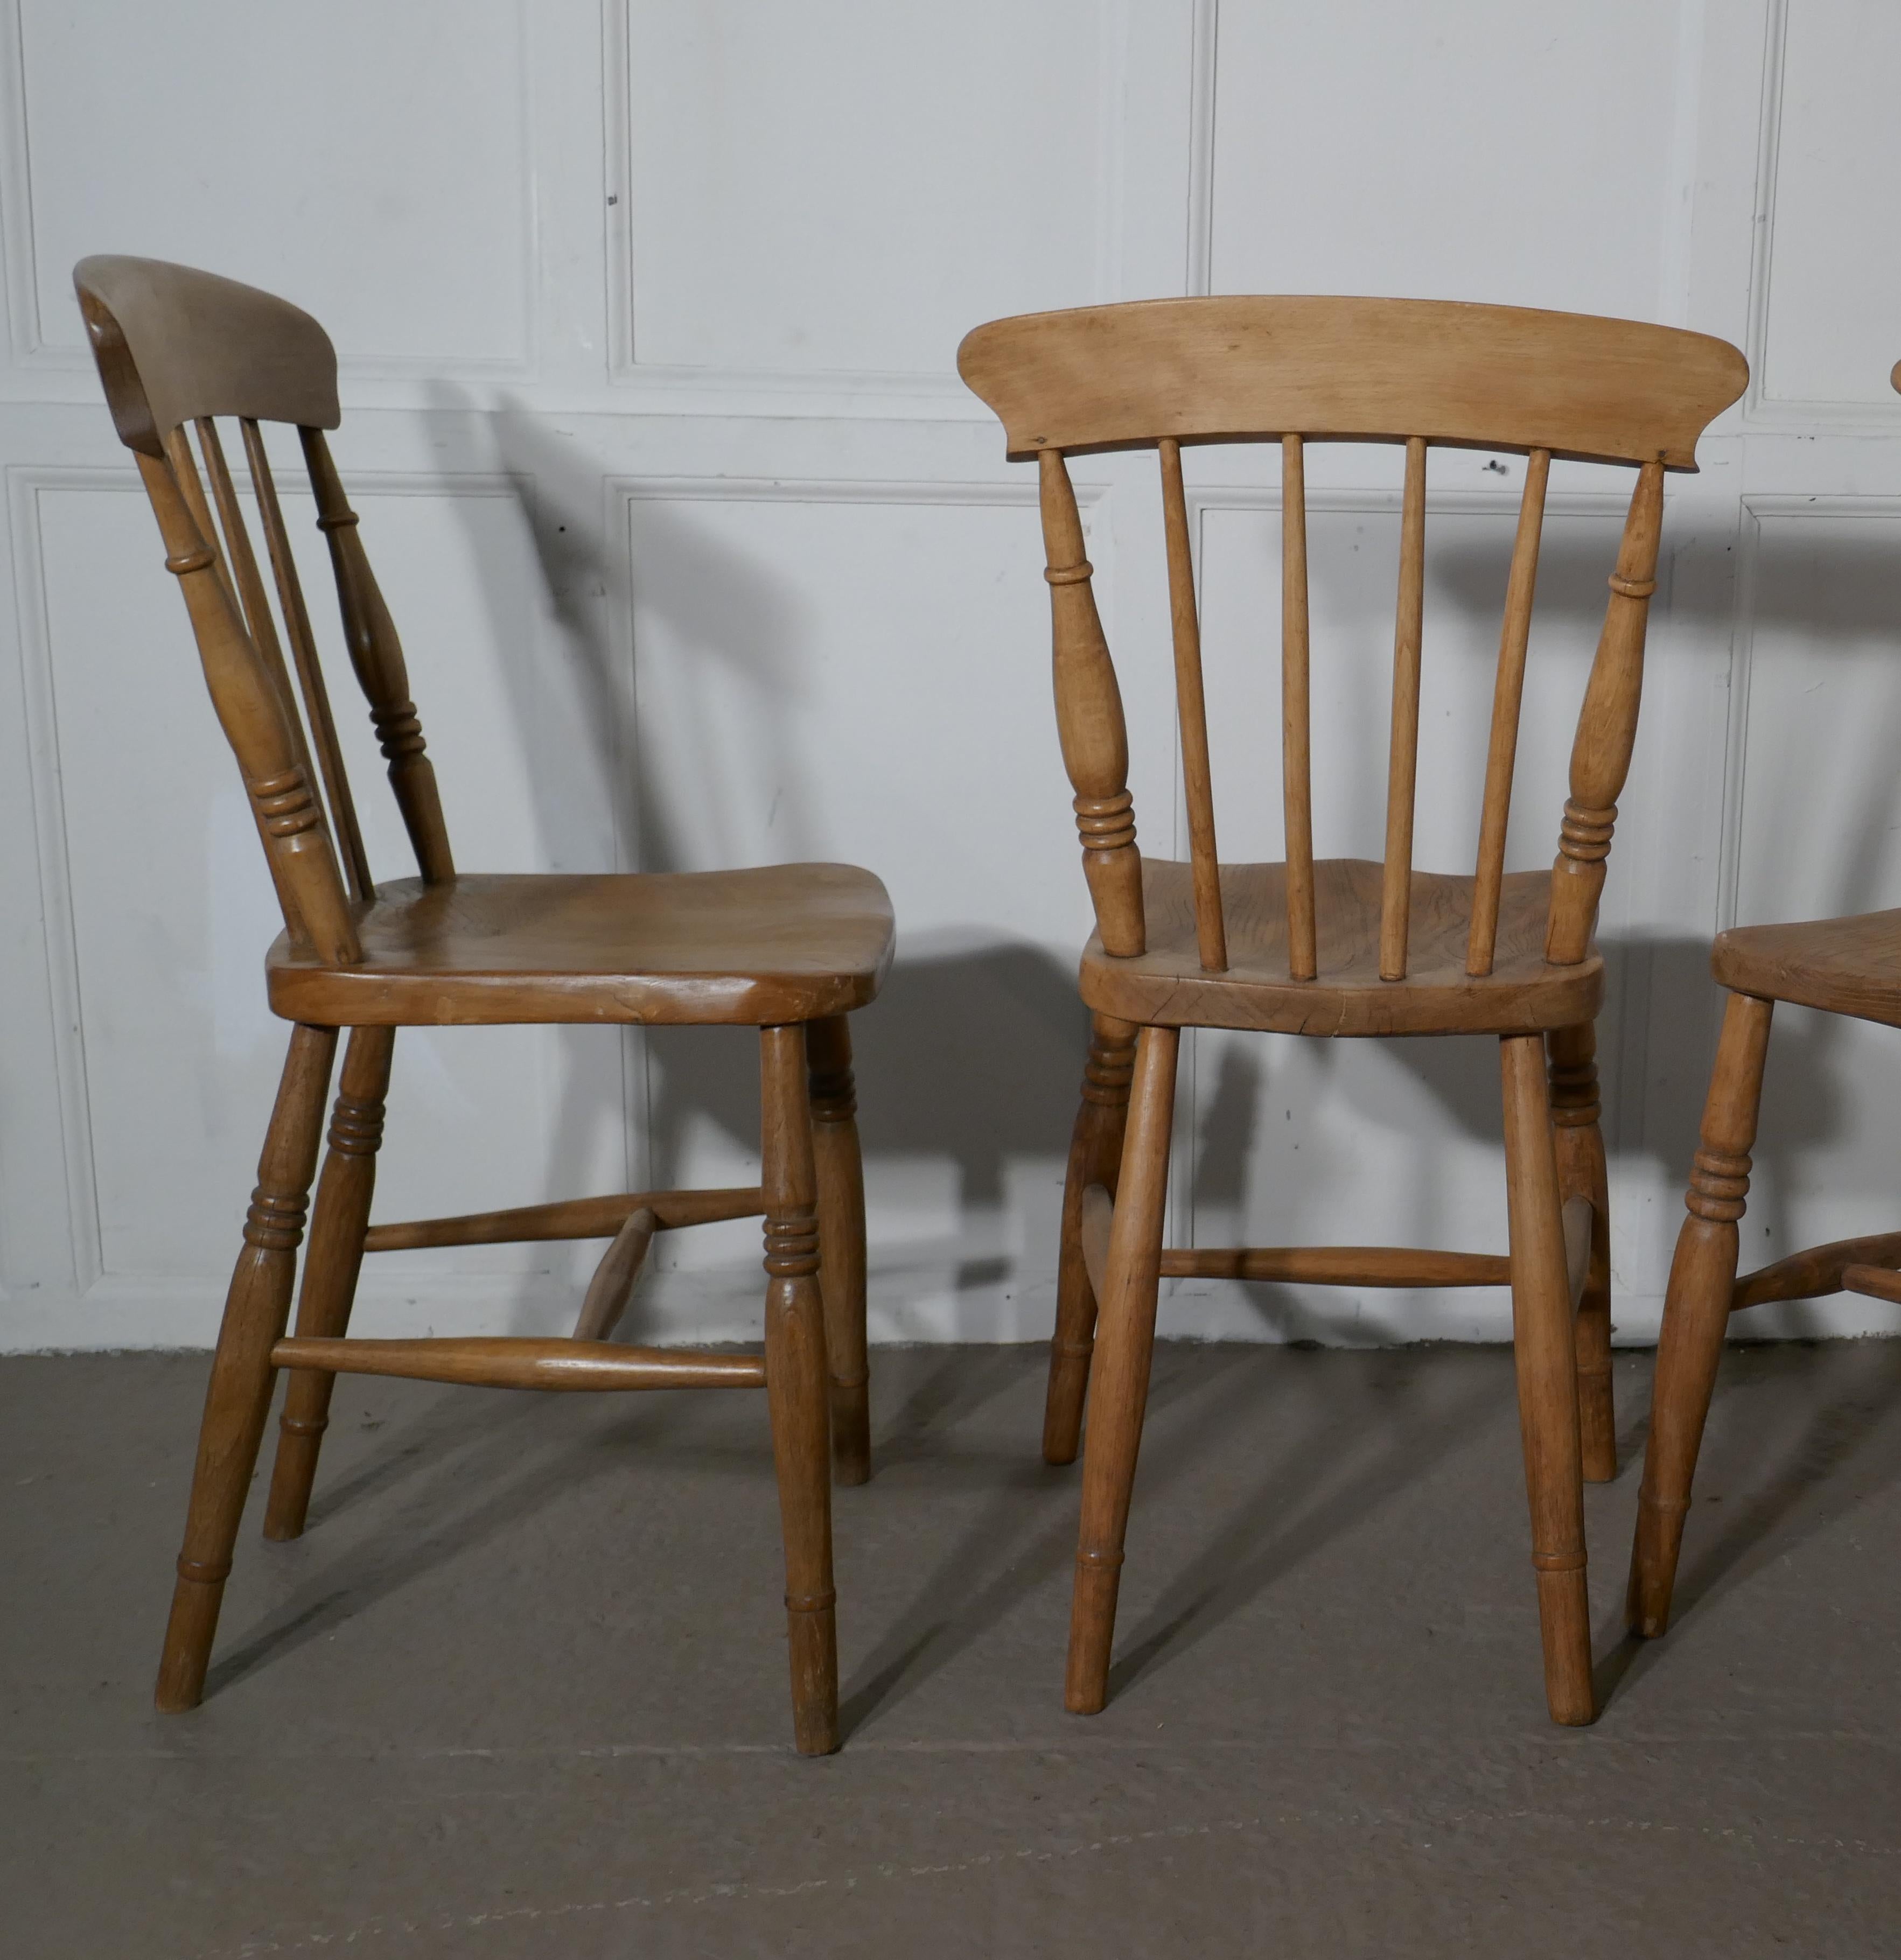 Harlequin Set of 4 Victorian Beech & Elm Country Kitchen Chairs

The chairs date from the late 19th Century, they are a classic spindle back design.

This is a good traditional set of chairs, with very slight differences in the turnings and the